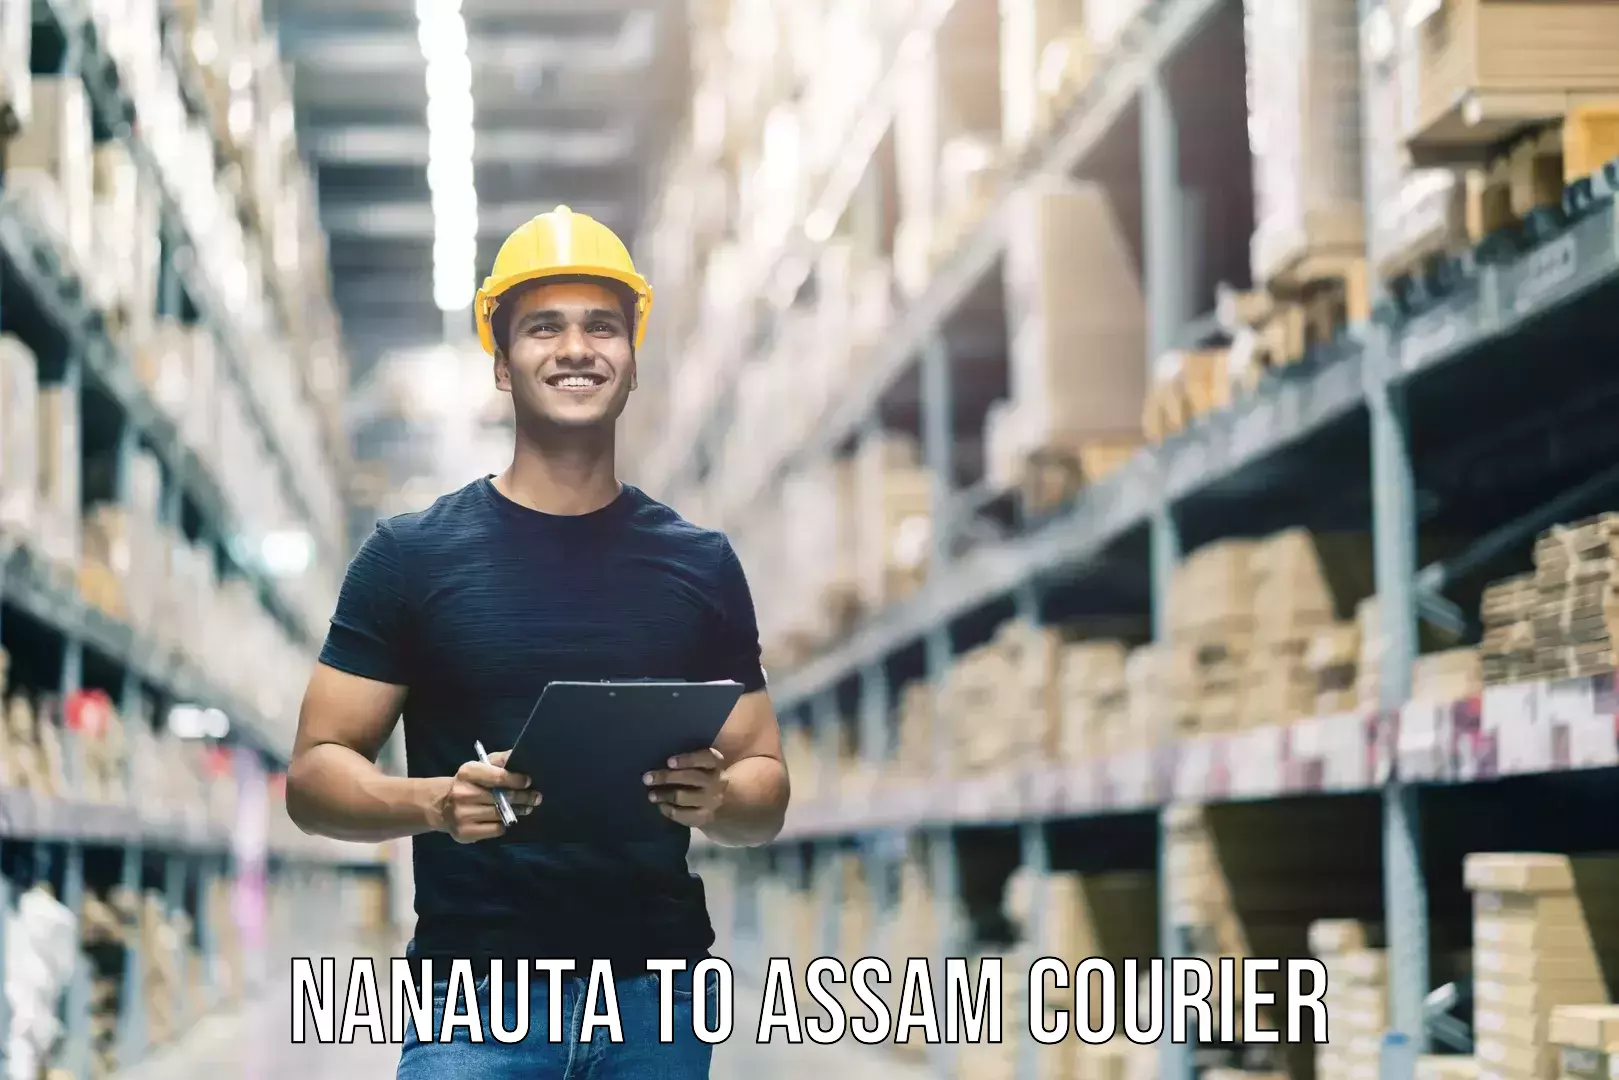 Luggage transport consulting Nanauta to Assam